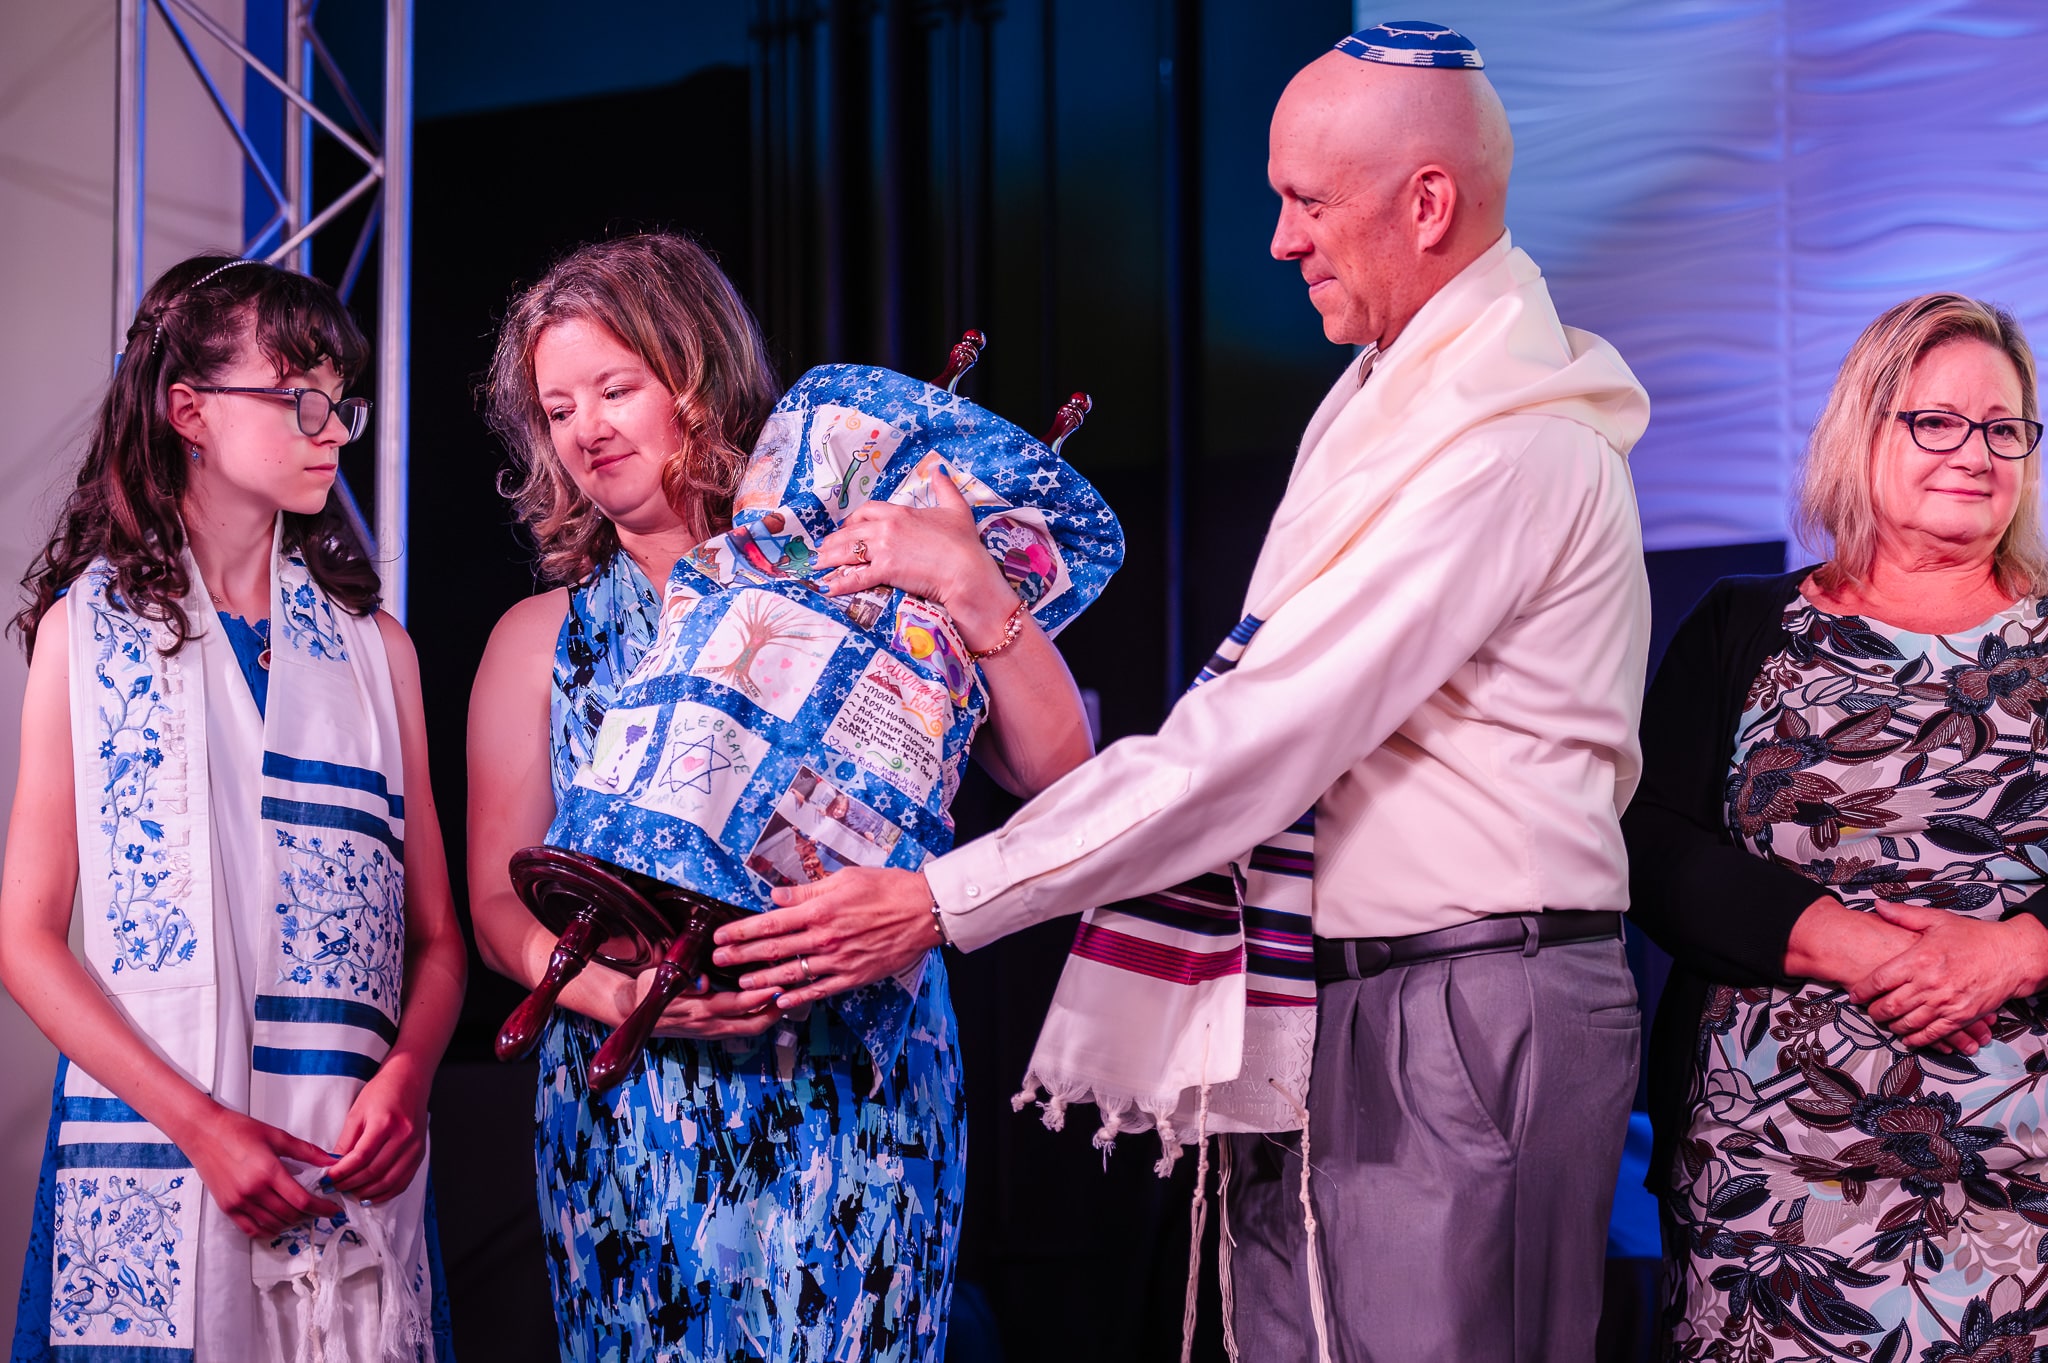 A woman receives The Torah from her husband and prepares to pass it to their daughter during a mitzvah service.